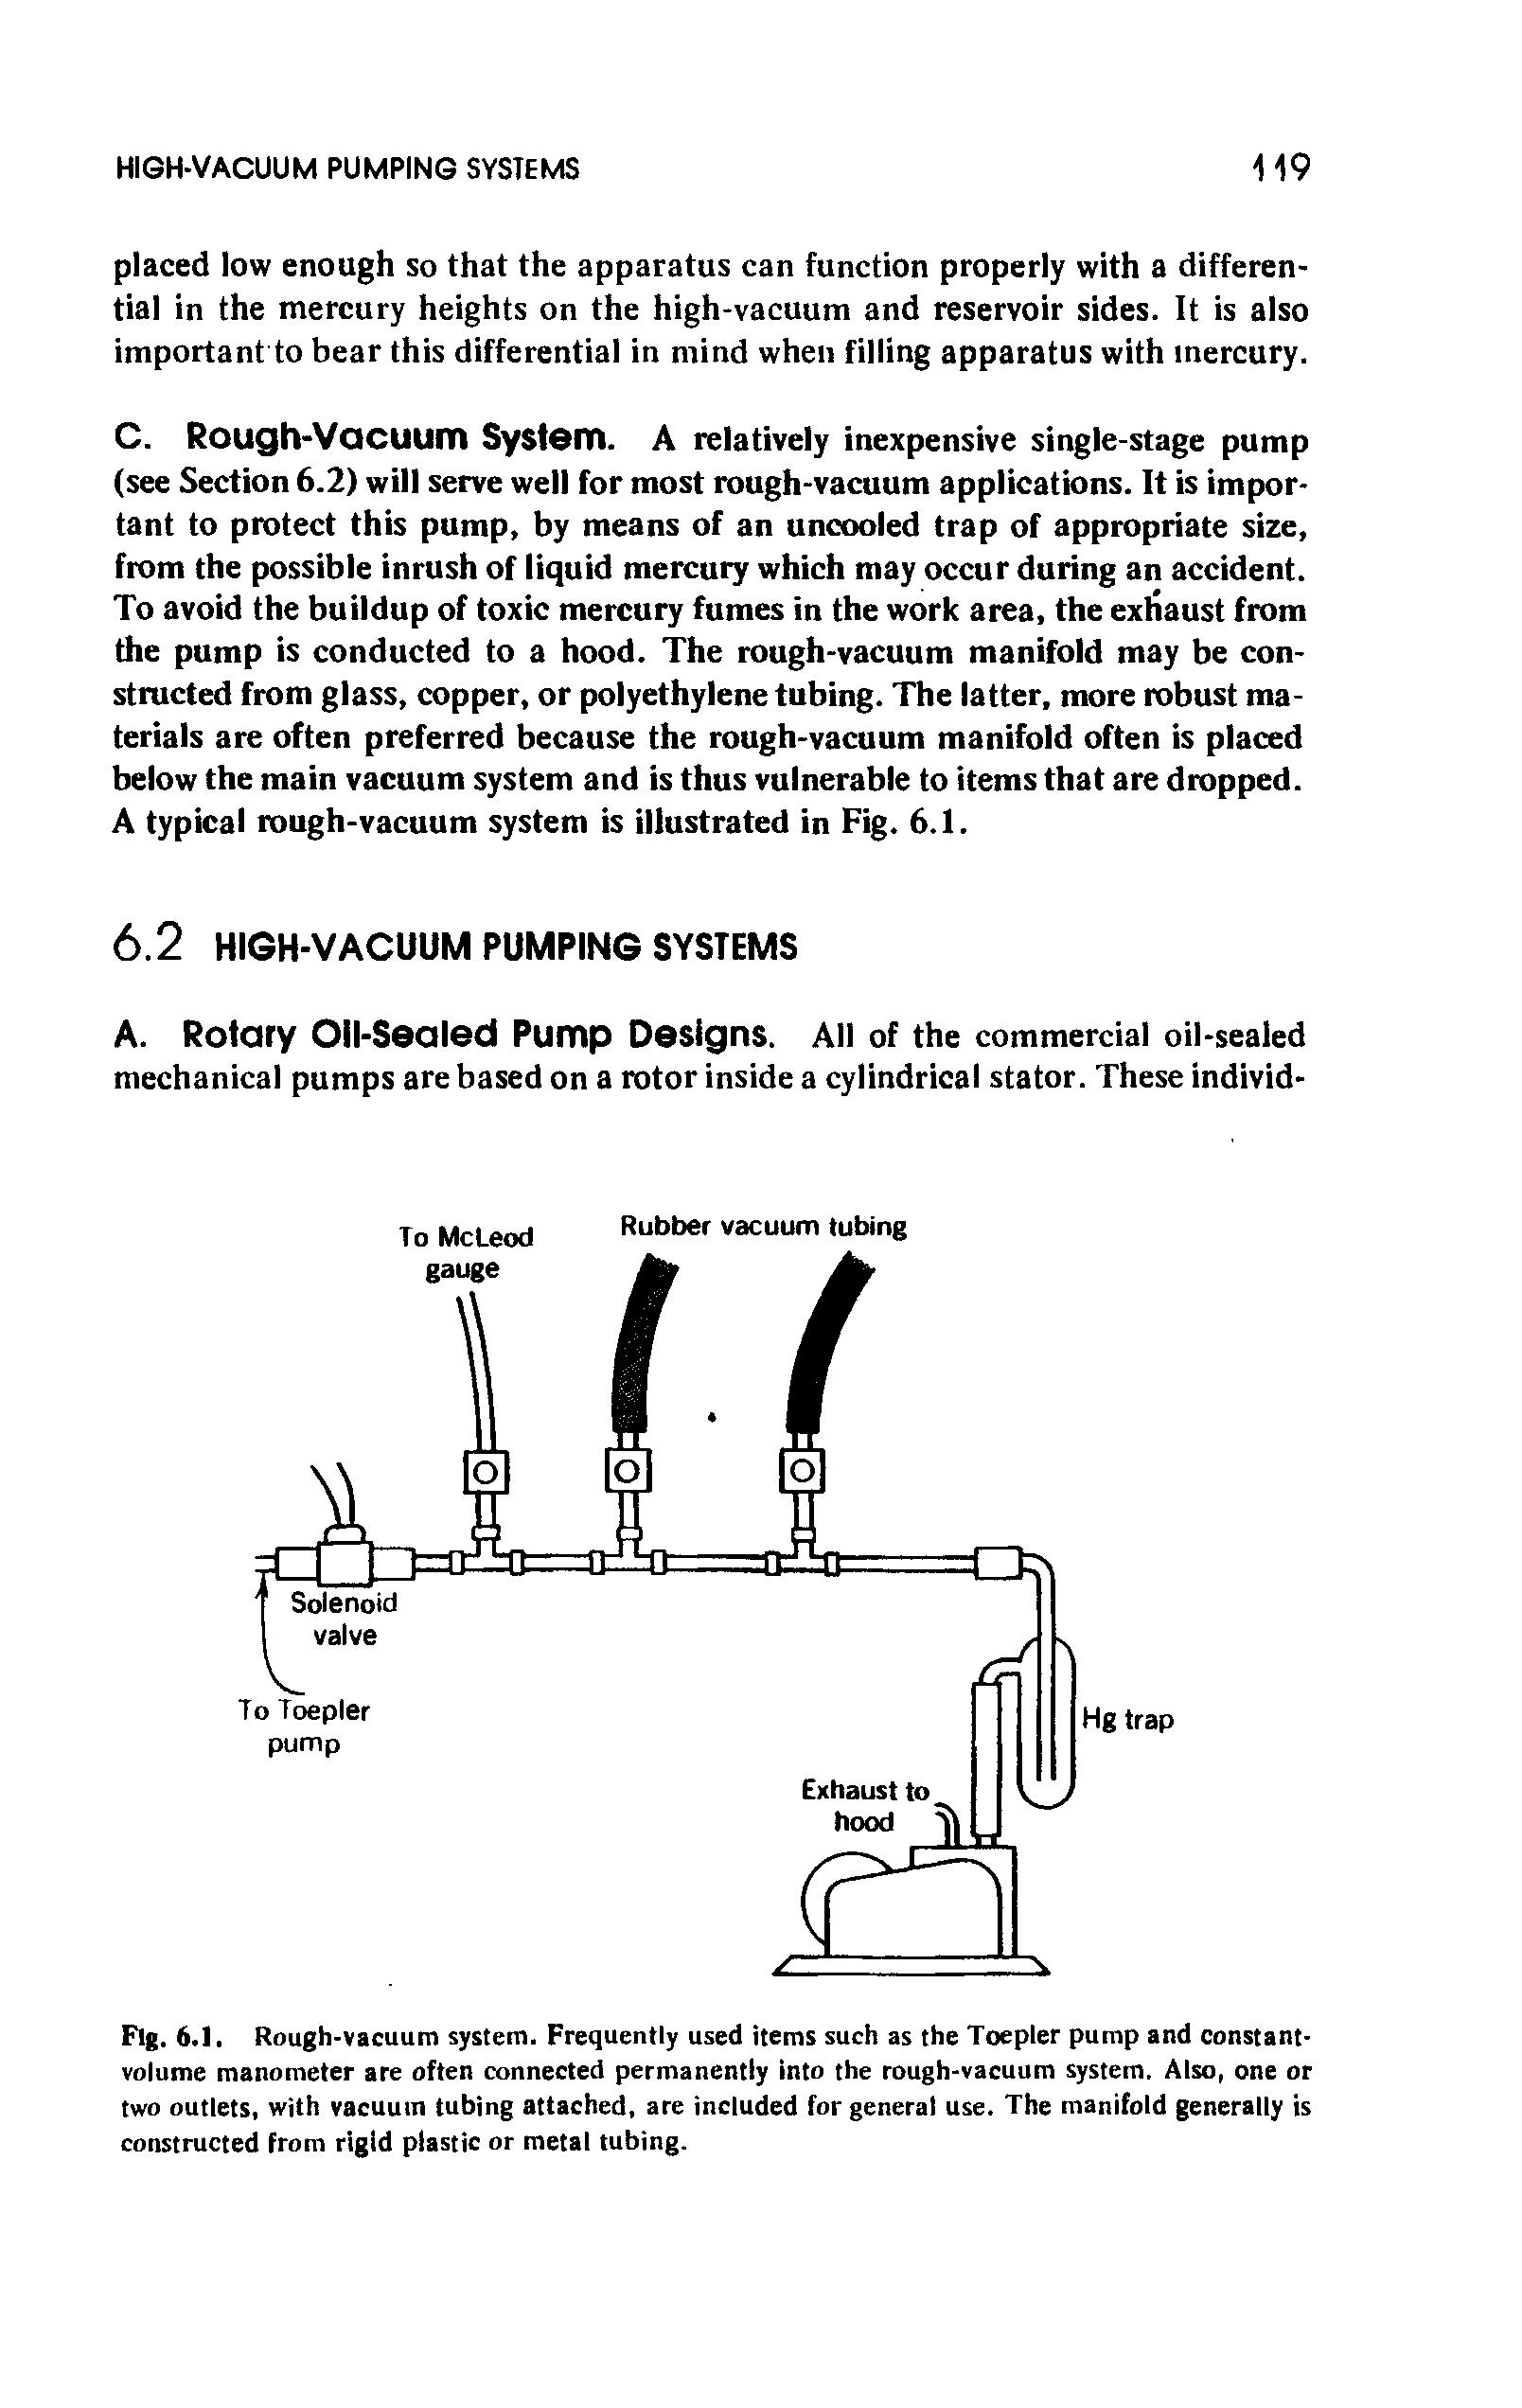 Fig. 6.1. Rough-vacuum system. Frequently used items such as the Toepler pump and constant-volume manometer are often connected permanently into the rough-vacuum system. Also, one or two outlets, with vacuum tubing attached, are included for general use. The manifold generally is constructed from rigid plastic or metal tubing.